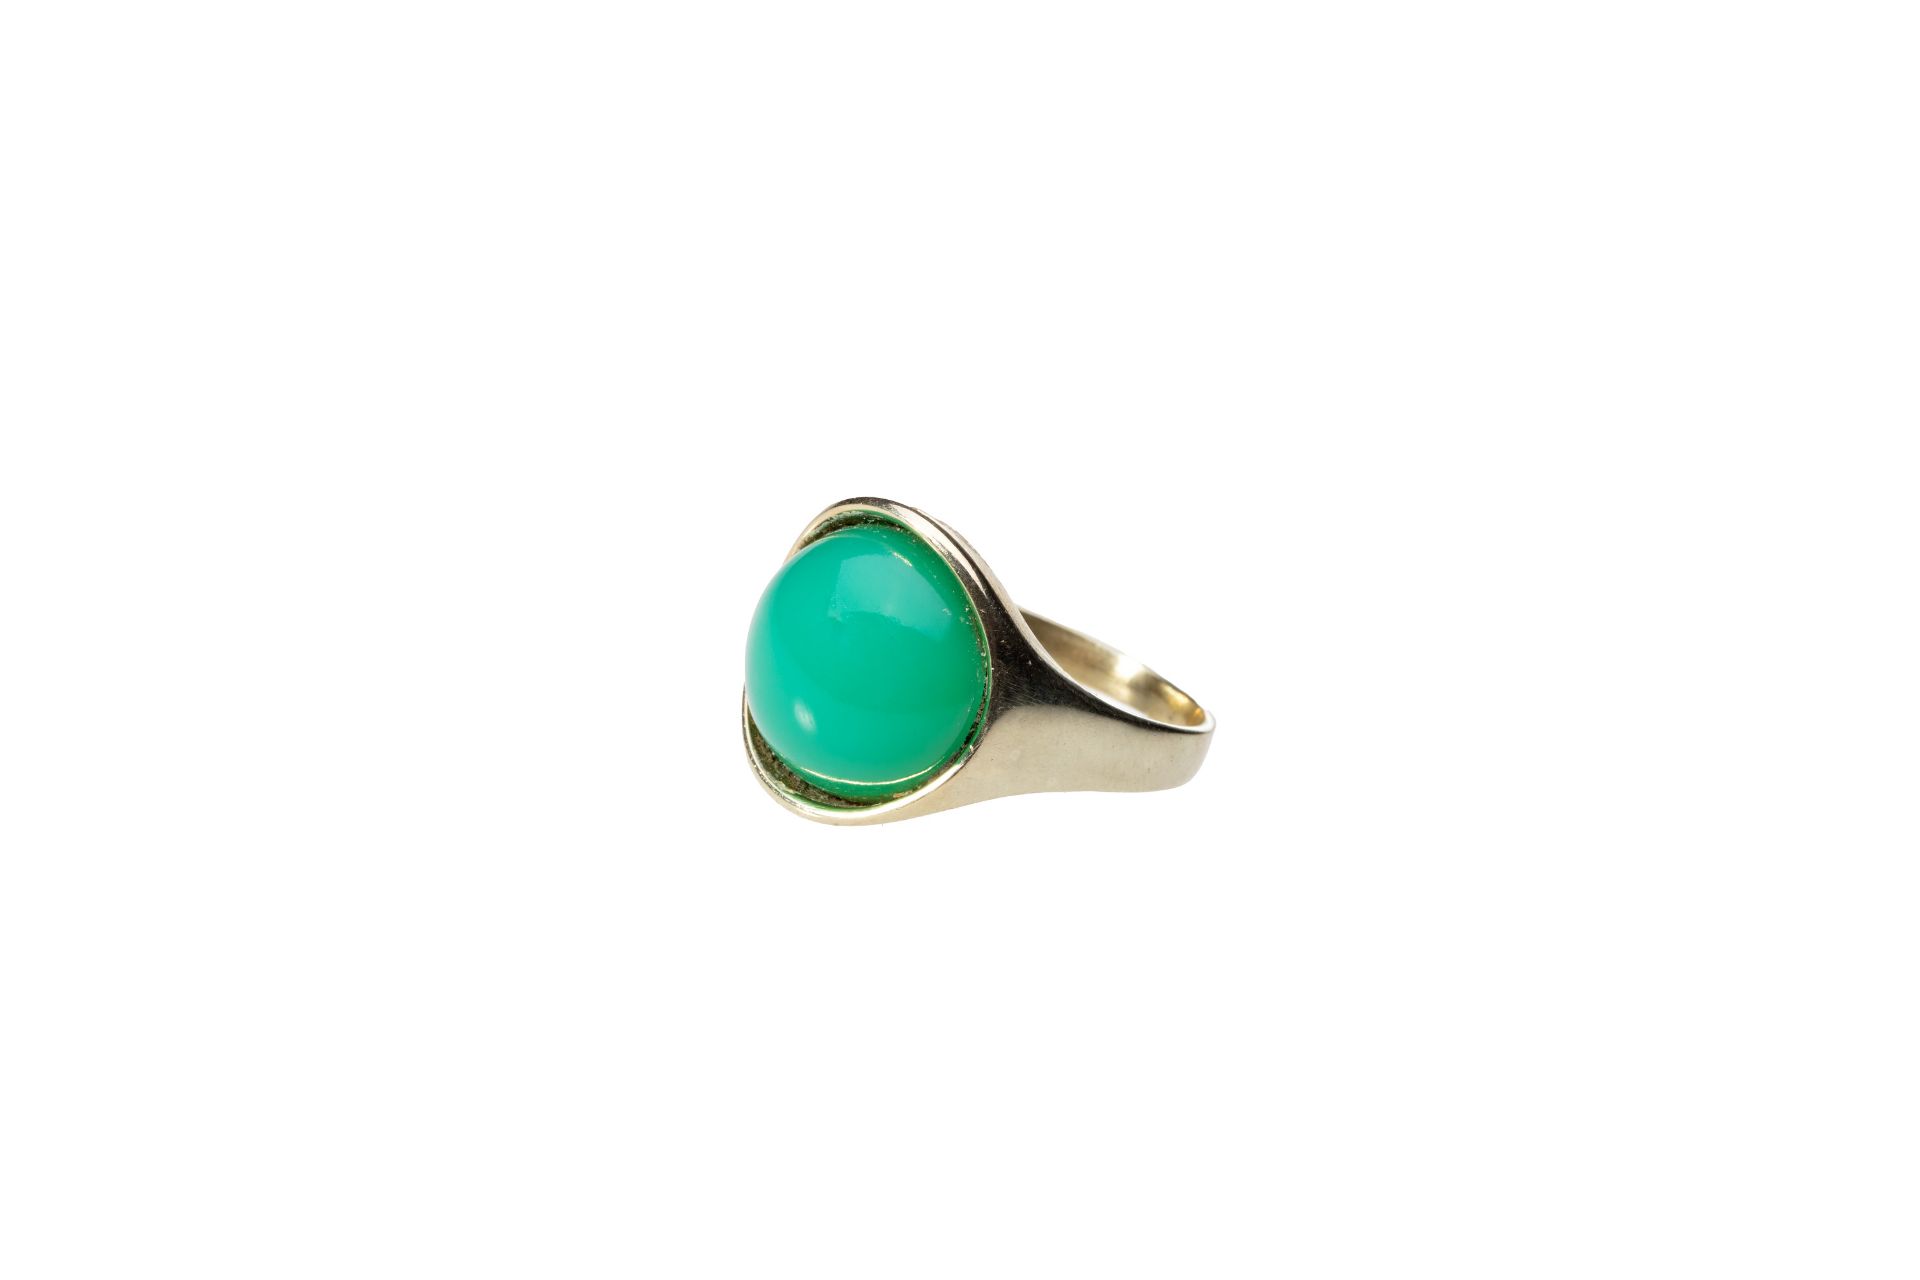 GOLD RING WITH SYNTHETIC EMERALD | Central Europe (Central European / Central Europe)